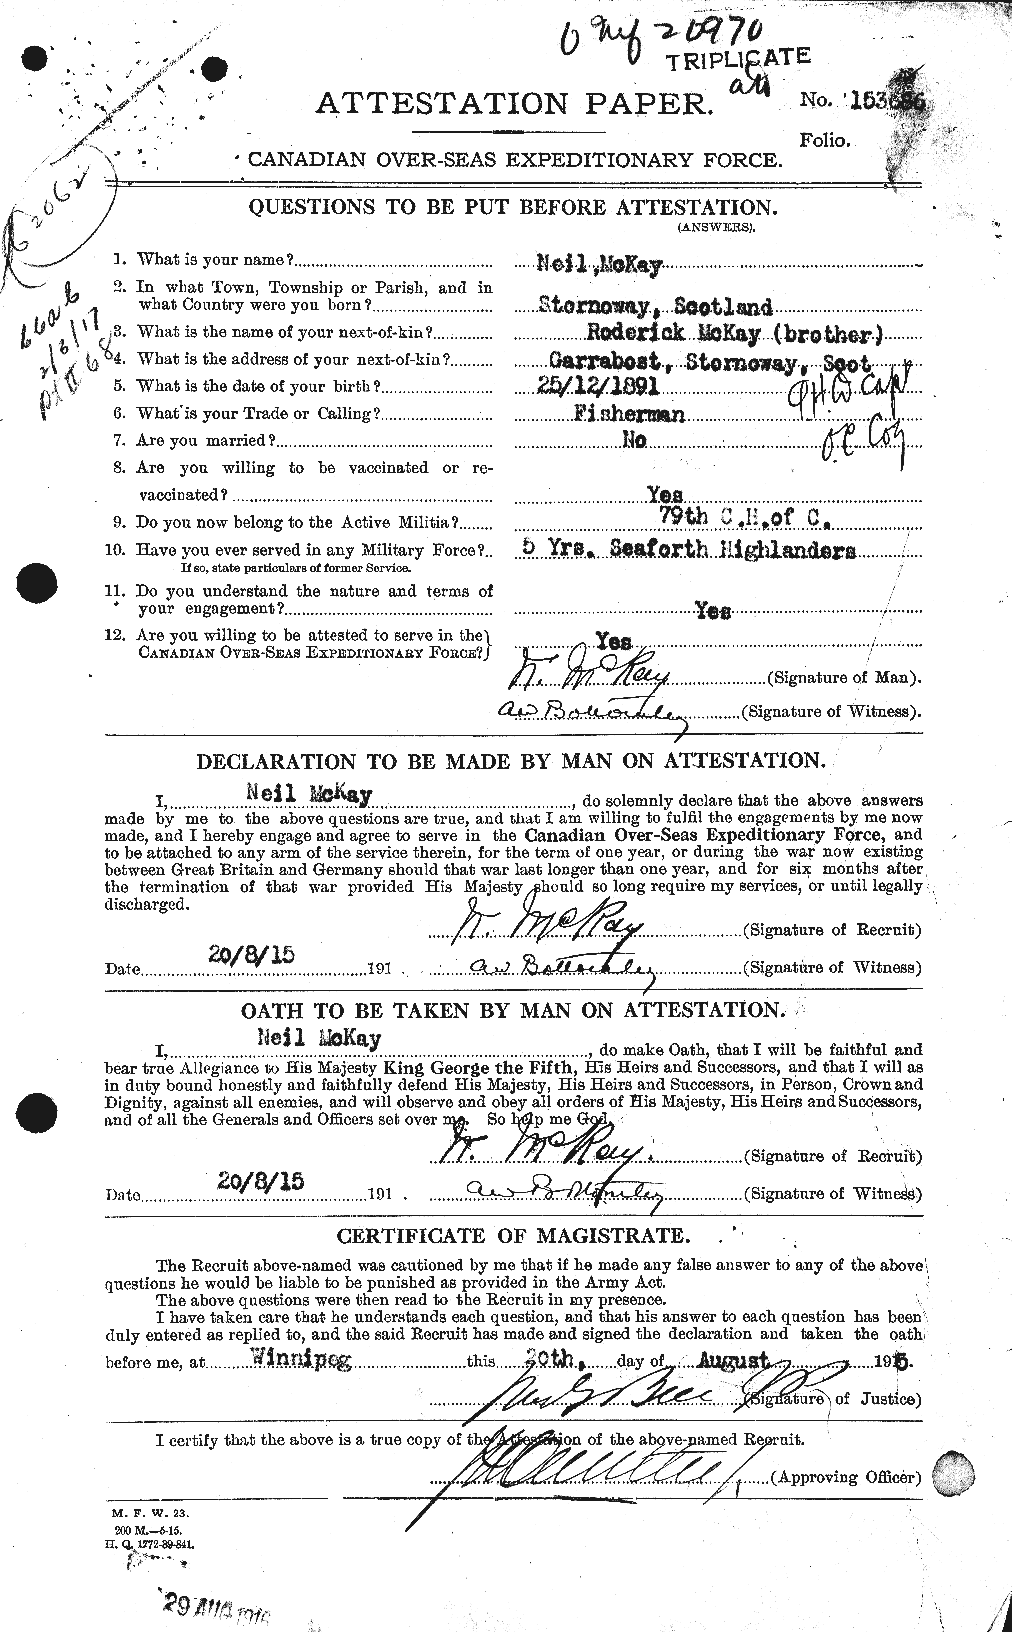 Personnel Records of the First World War - CEF 527202a